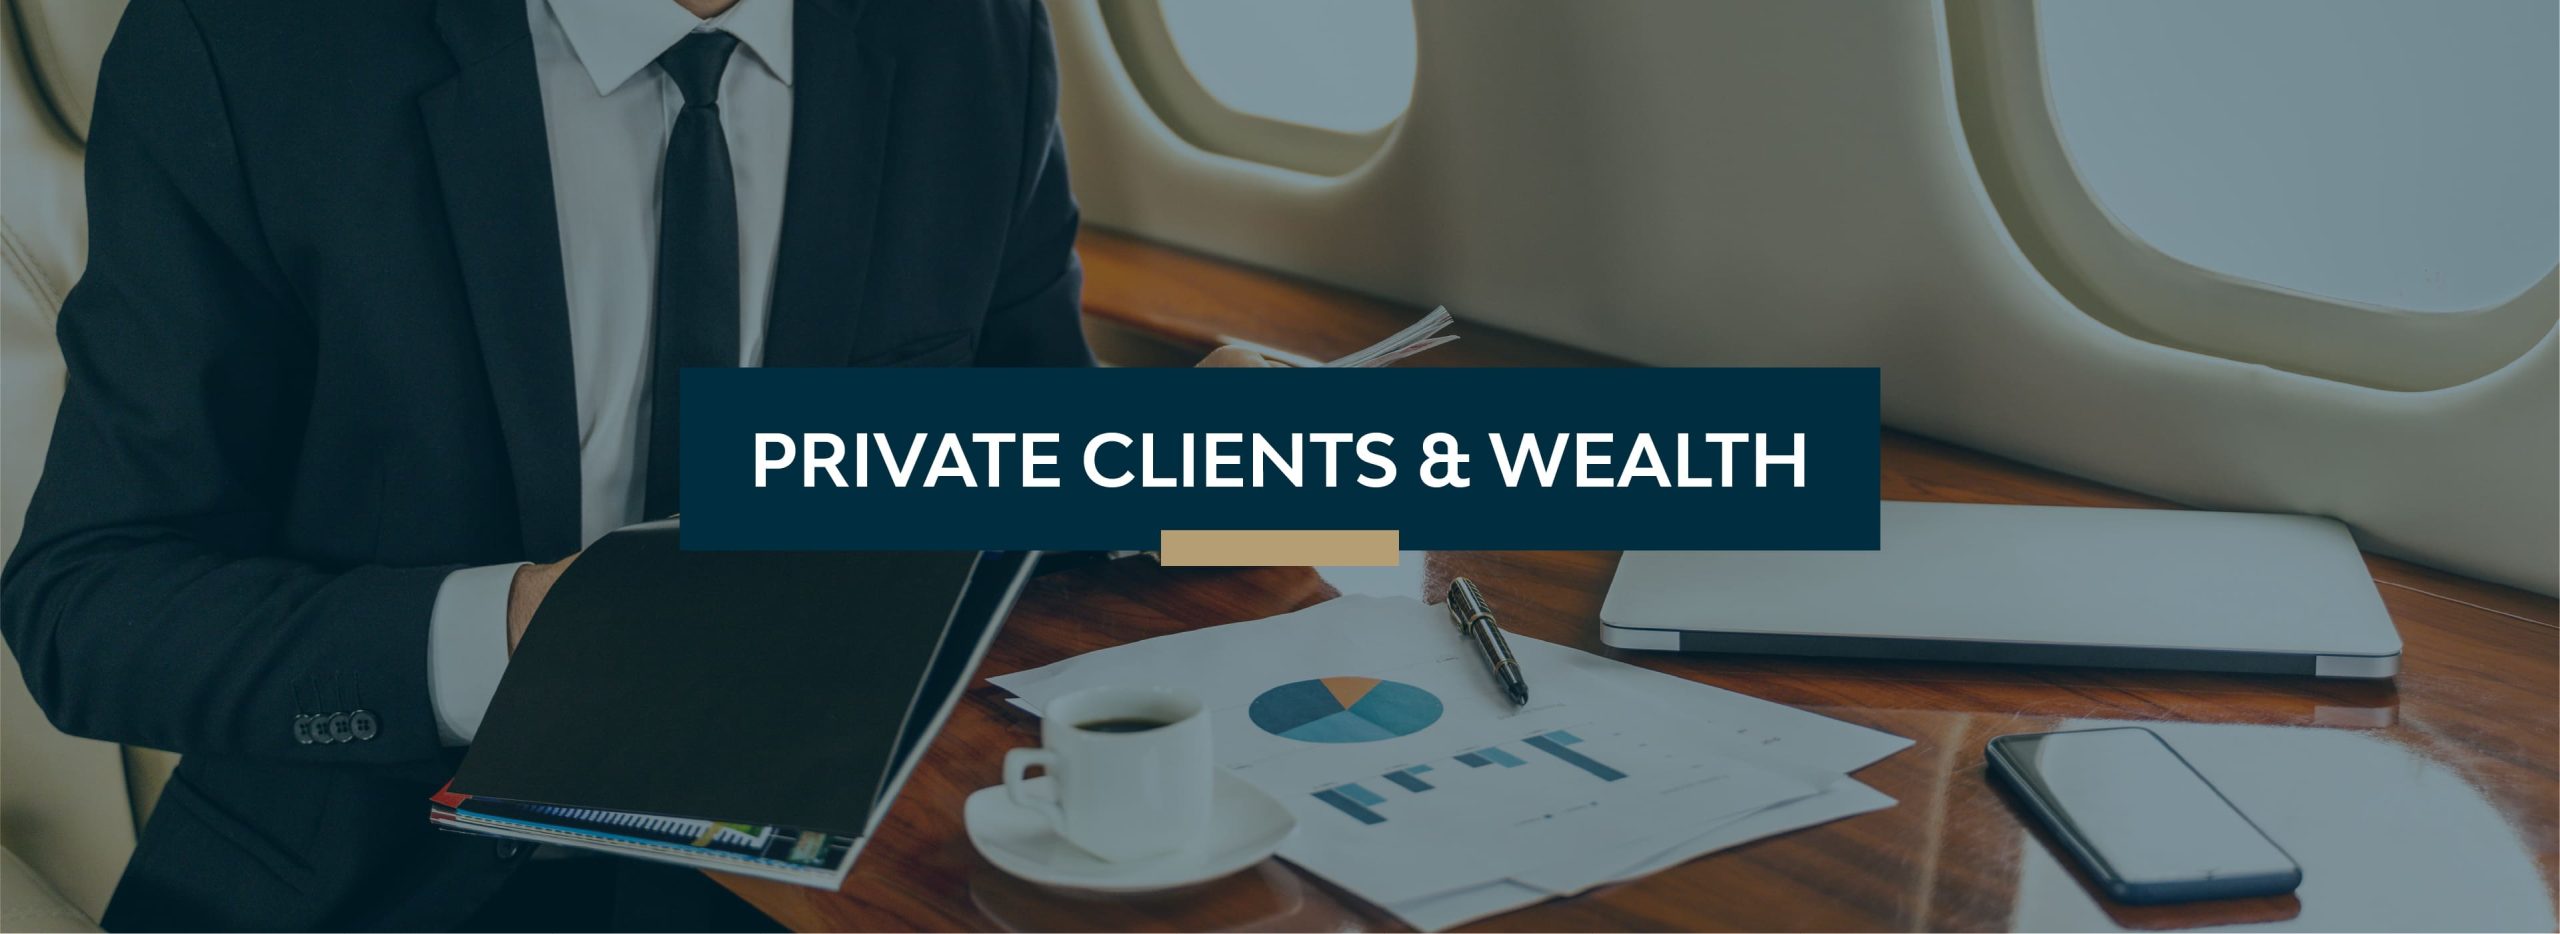 Private Clients & Wealth